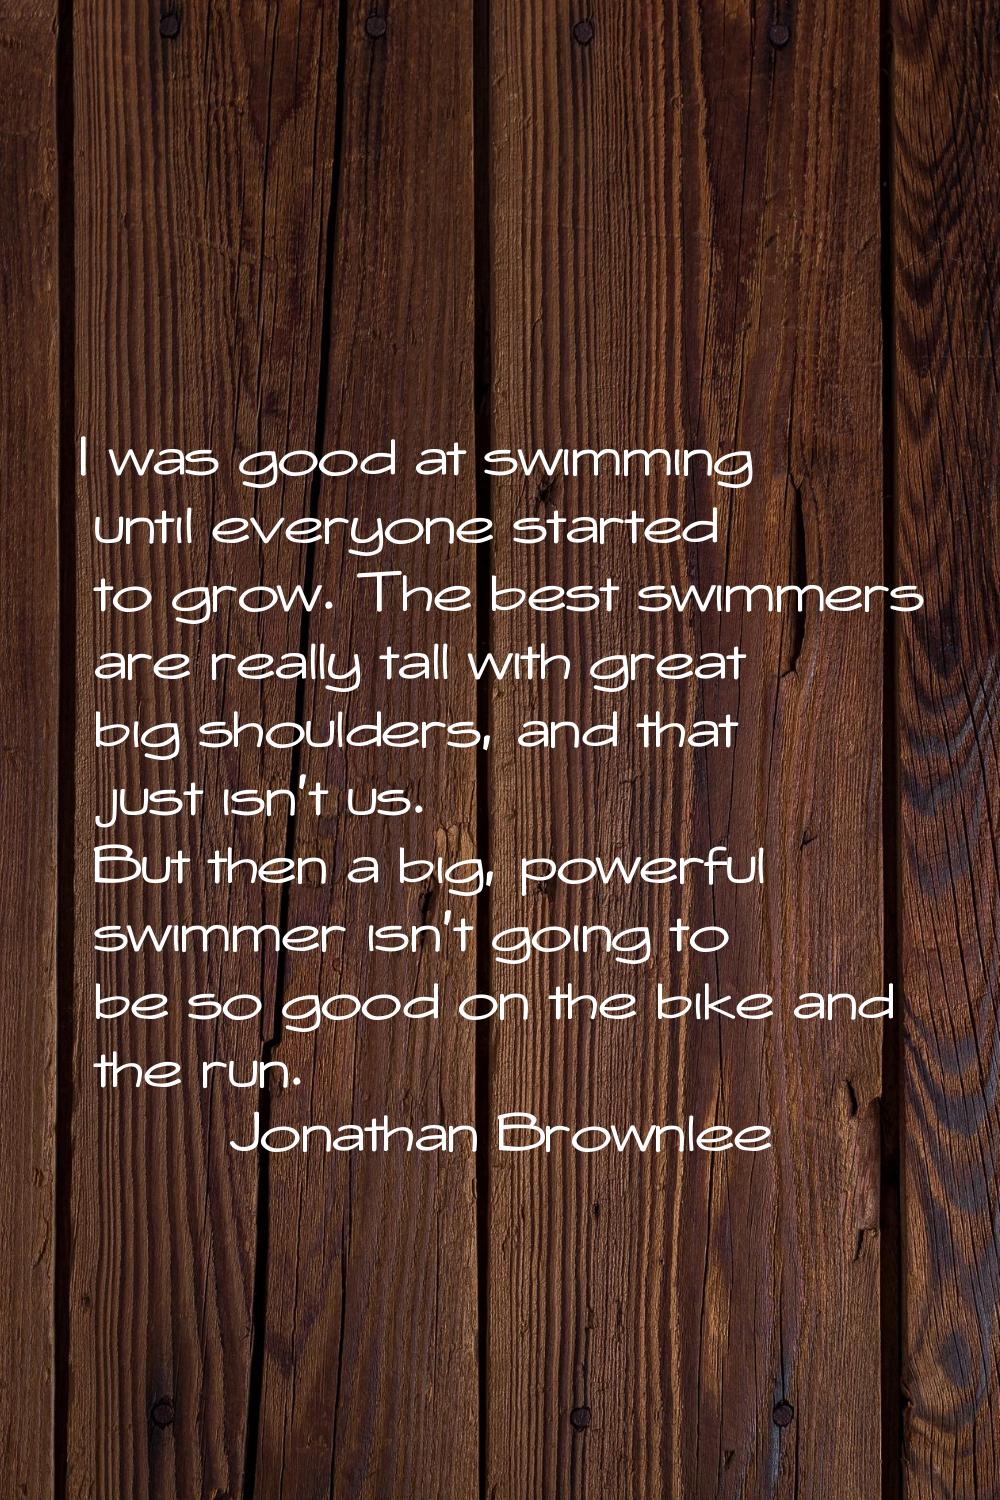 I was good at swimming until everyone started to grow. The best swimmers are really tall with great